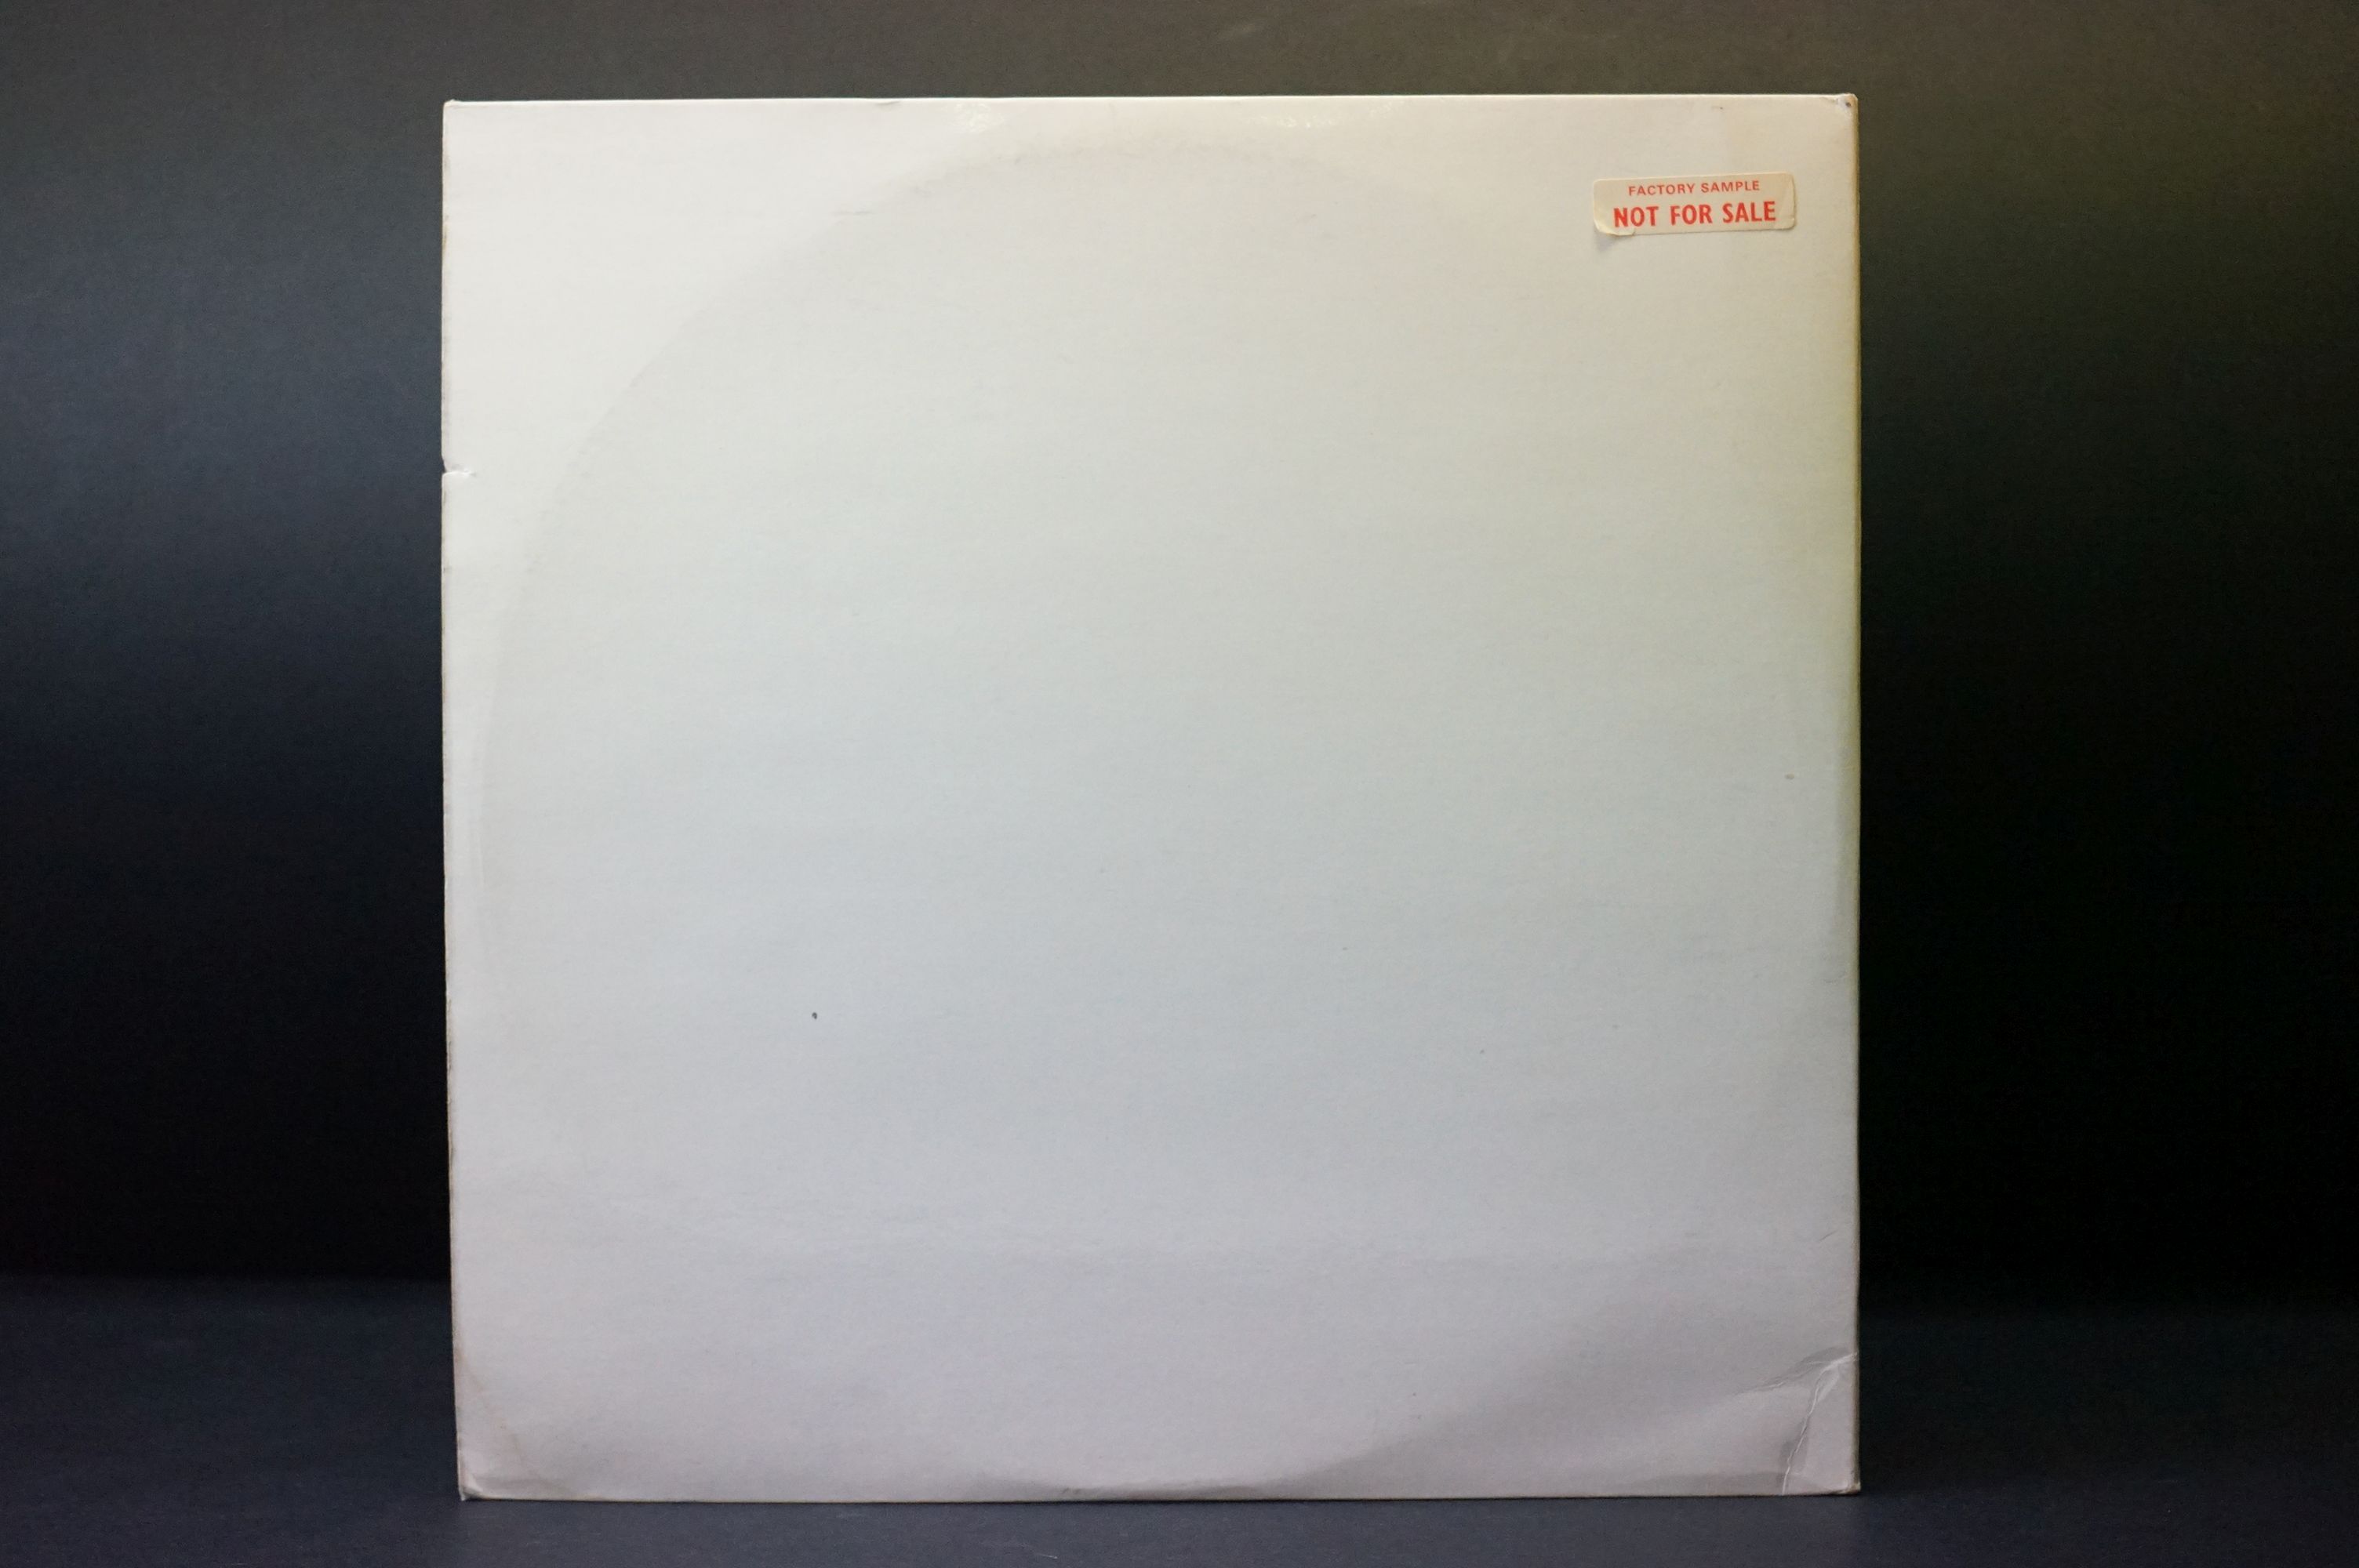 Vinyl - The Beatles White Album PCS 7067/8 Stereo. Unnumbered, side opener, poster and 4 photos, - Image 6 of 7